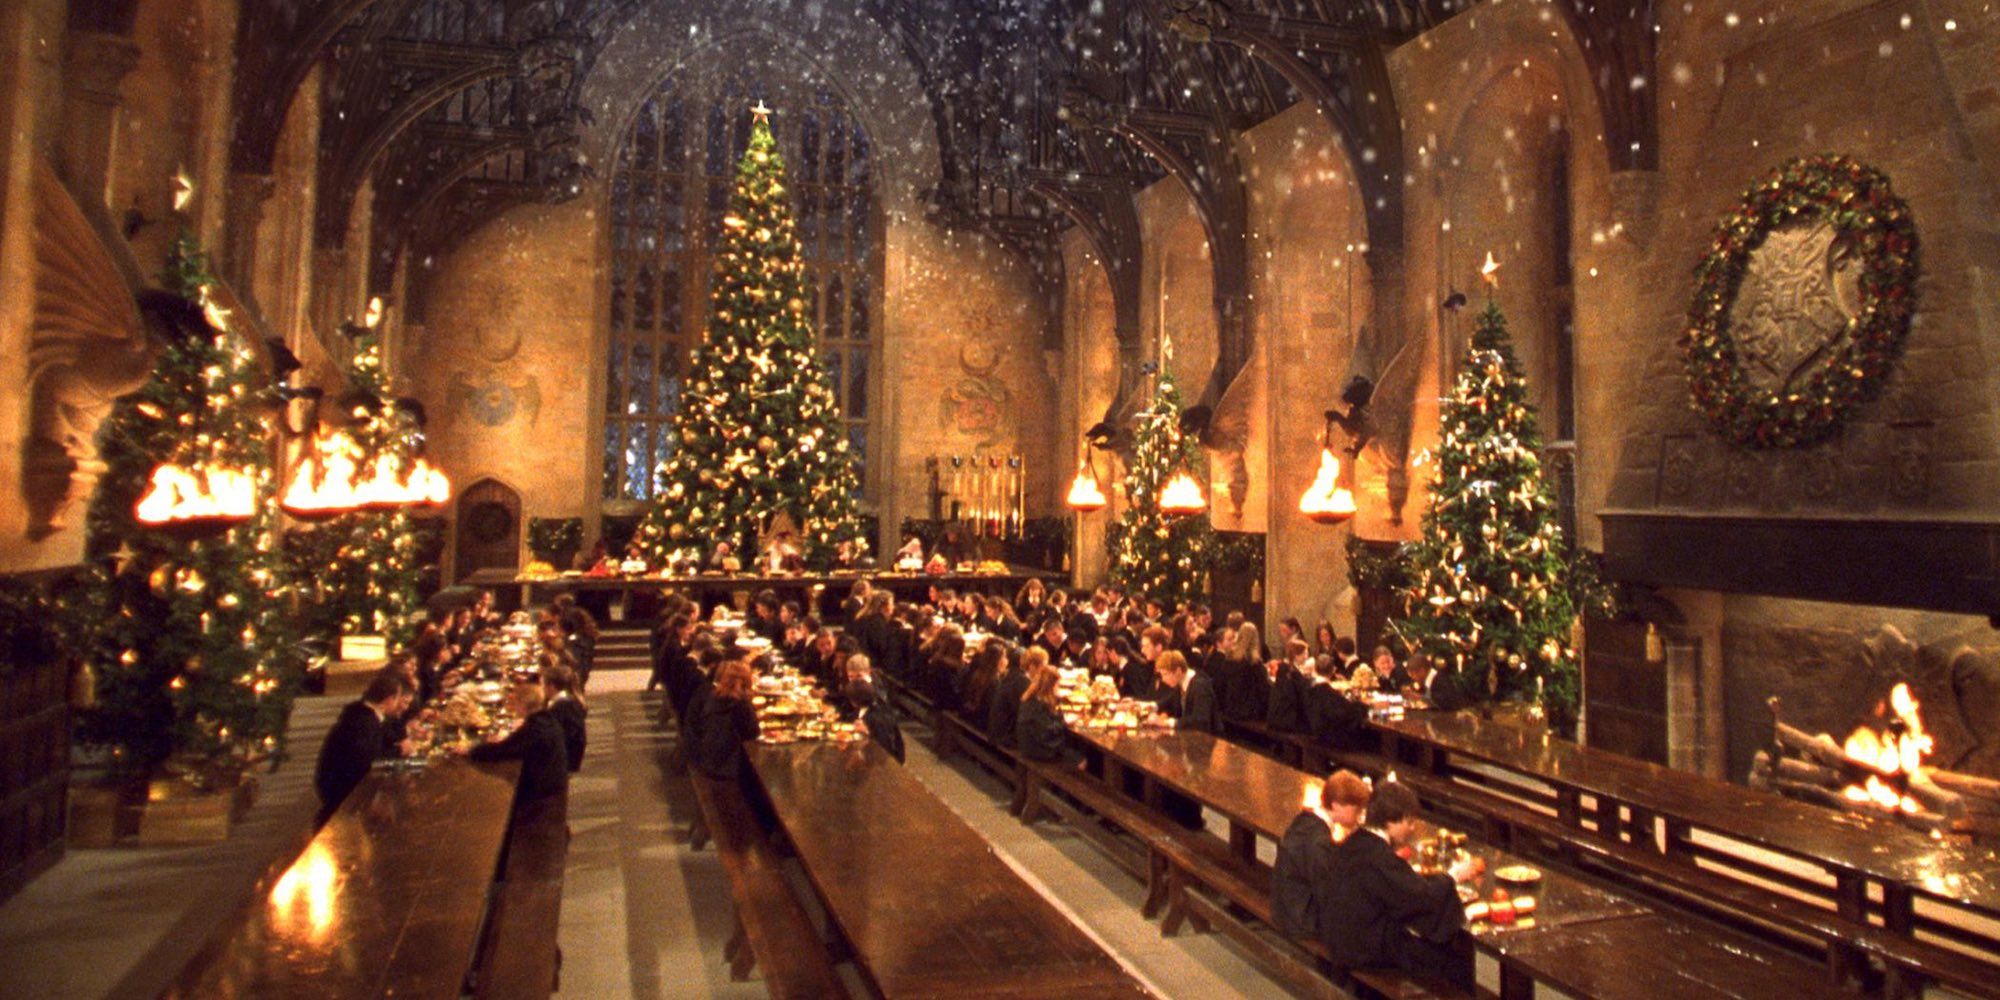 Hogwarts' Great Hall in the Harry Potter movies